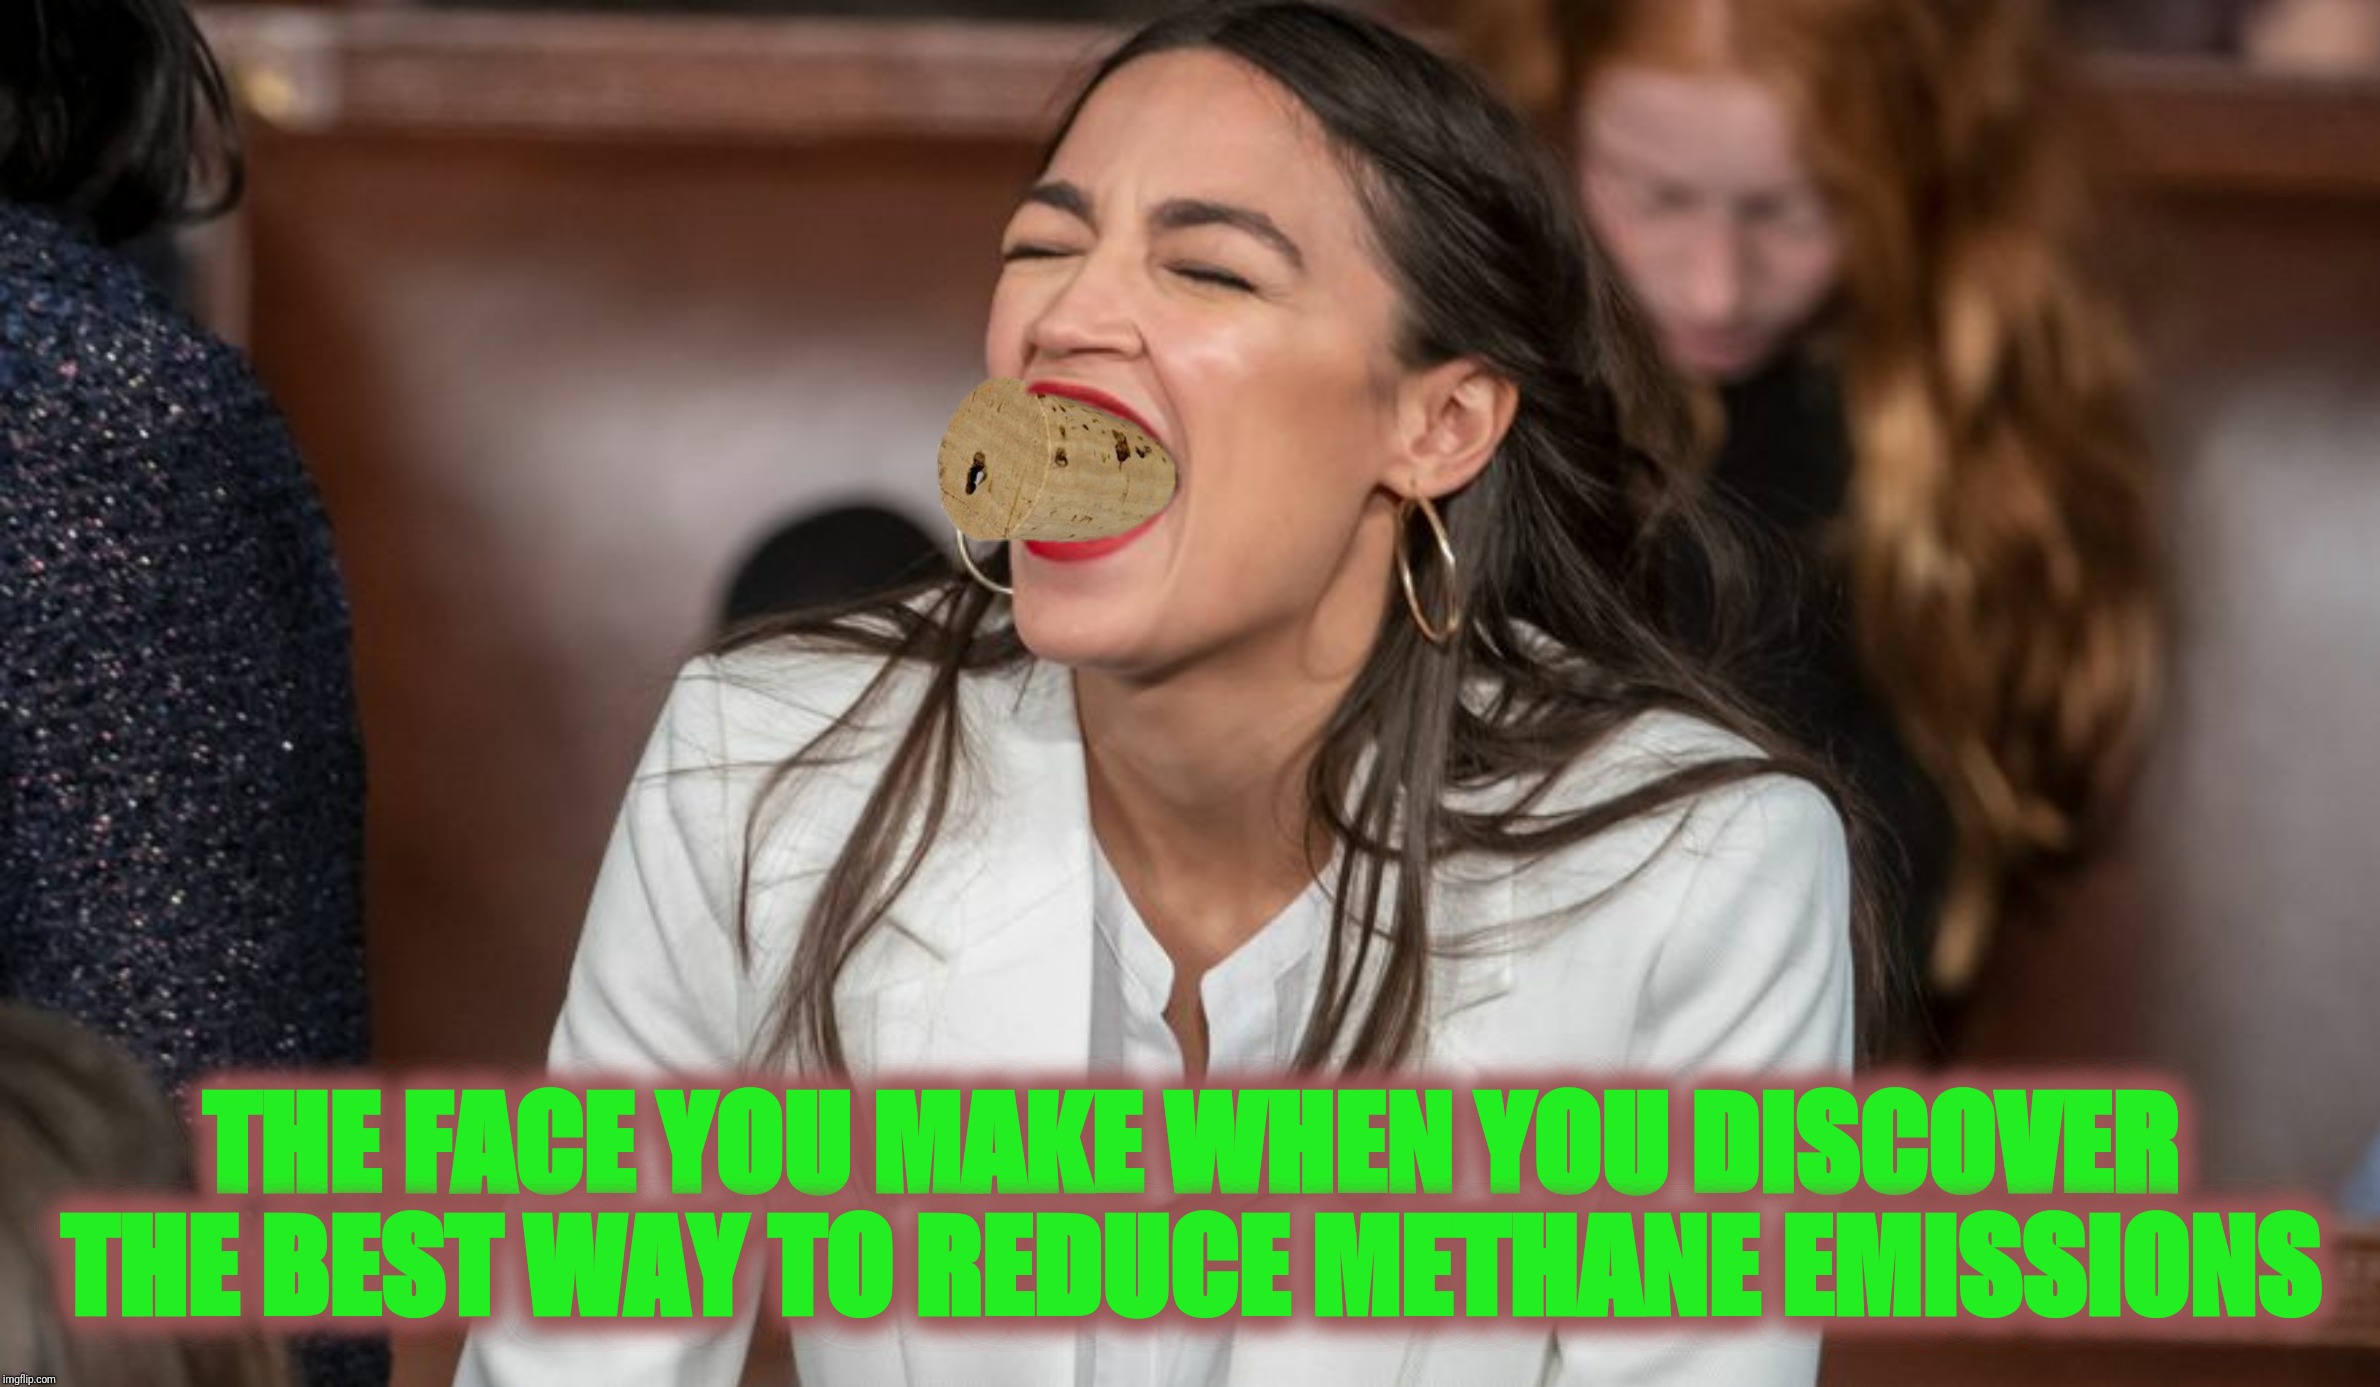 Turns out cow farts are only a small part of the problem | THE FACE YOU MAKE WHEN YOU DISCOVER THE BEST WAY TO REDUCE METHANE EMISSIONS | image tagged in cork,the face you make when,alexandria ocasio-cortez,cow farts,new green deal | made w/ Imgflip meme maker